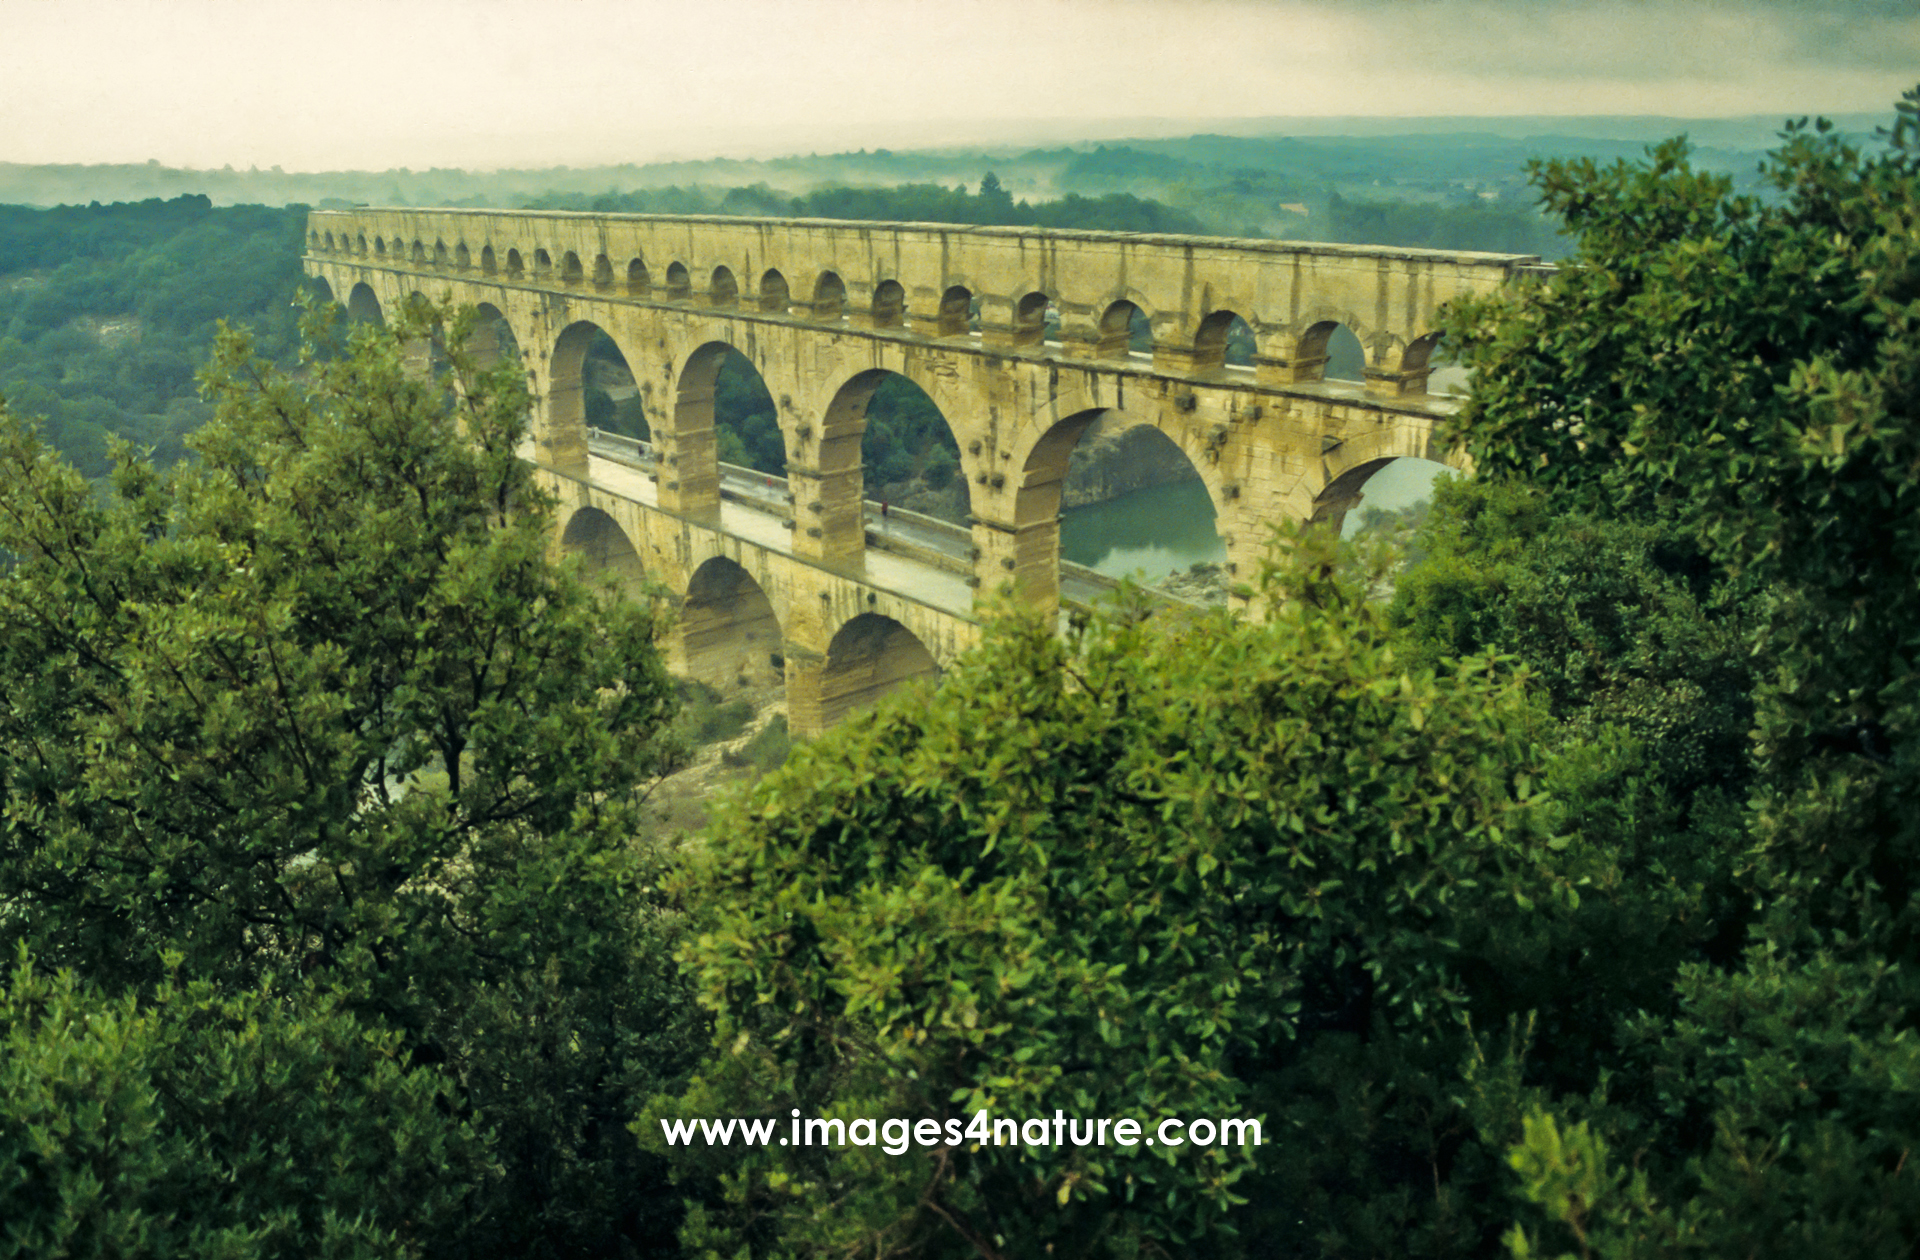 Side view of Pont du Gard aqueduct on a rainy summer day